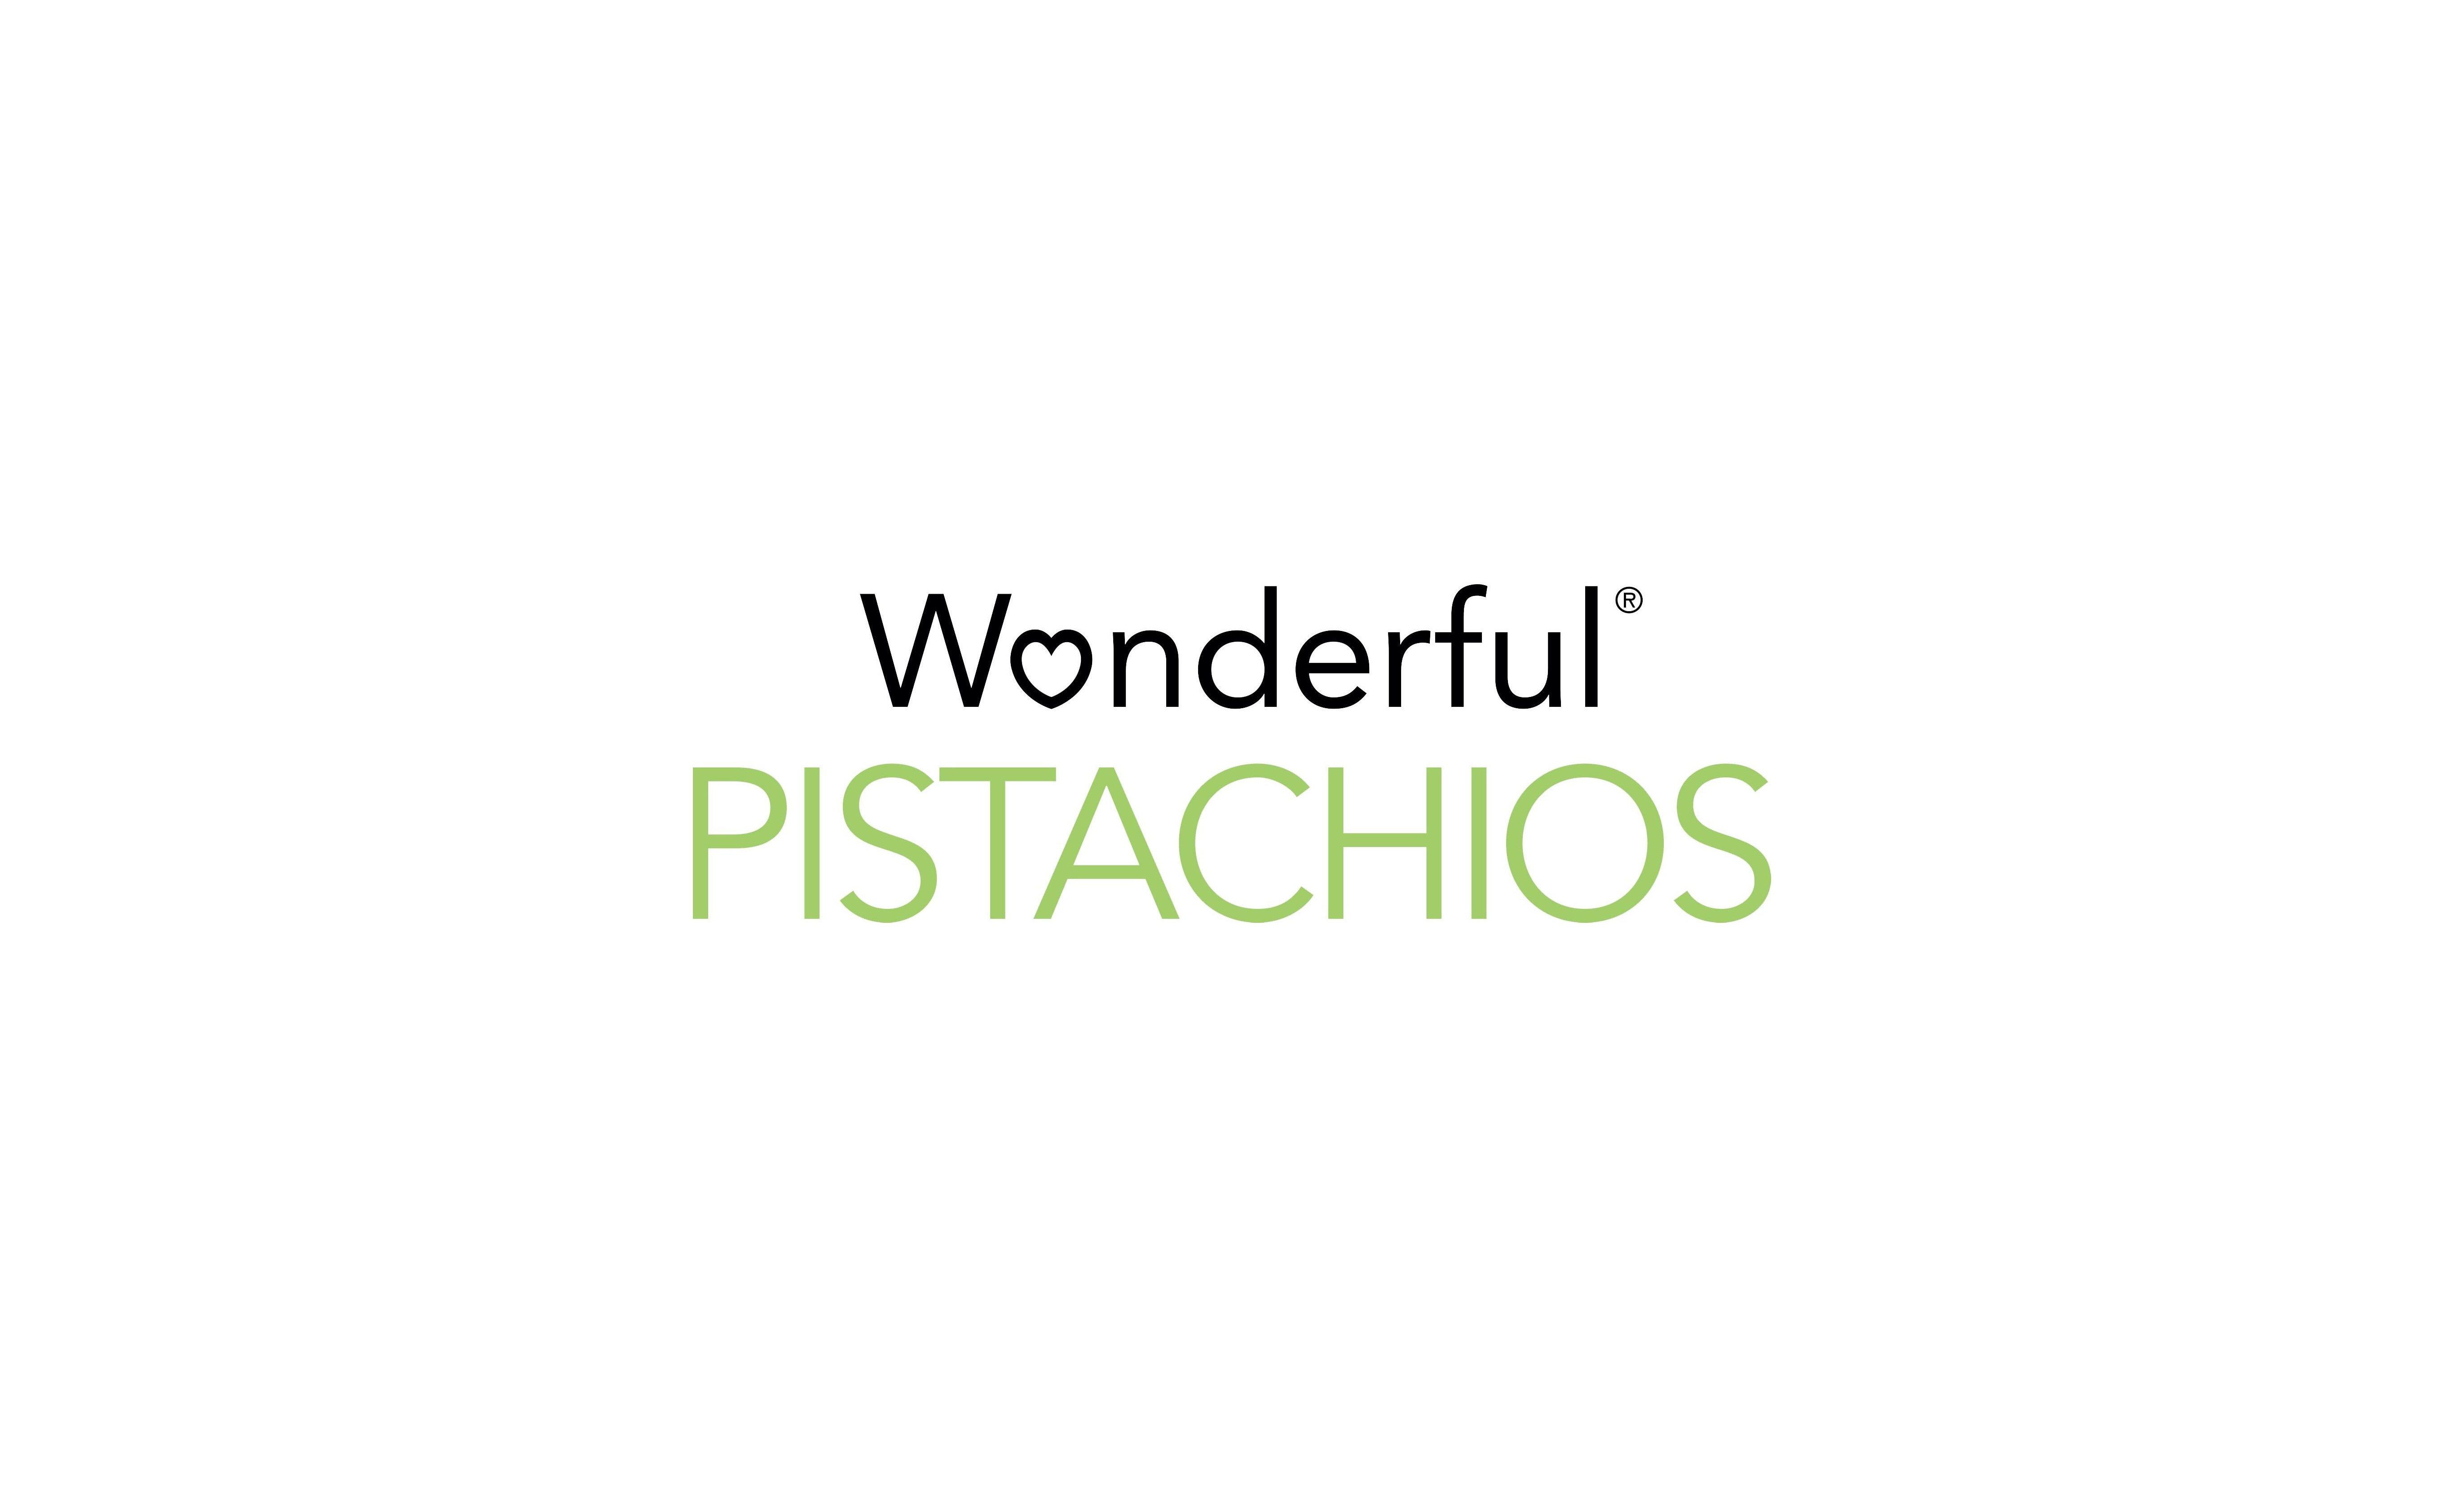 Wonderful Pistachios No Shells launches new Chili Roasted and Honey.